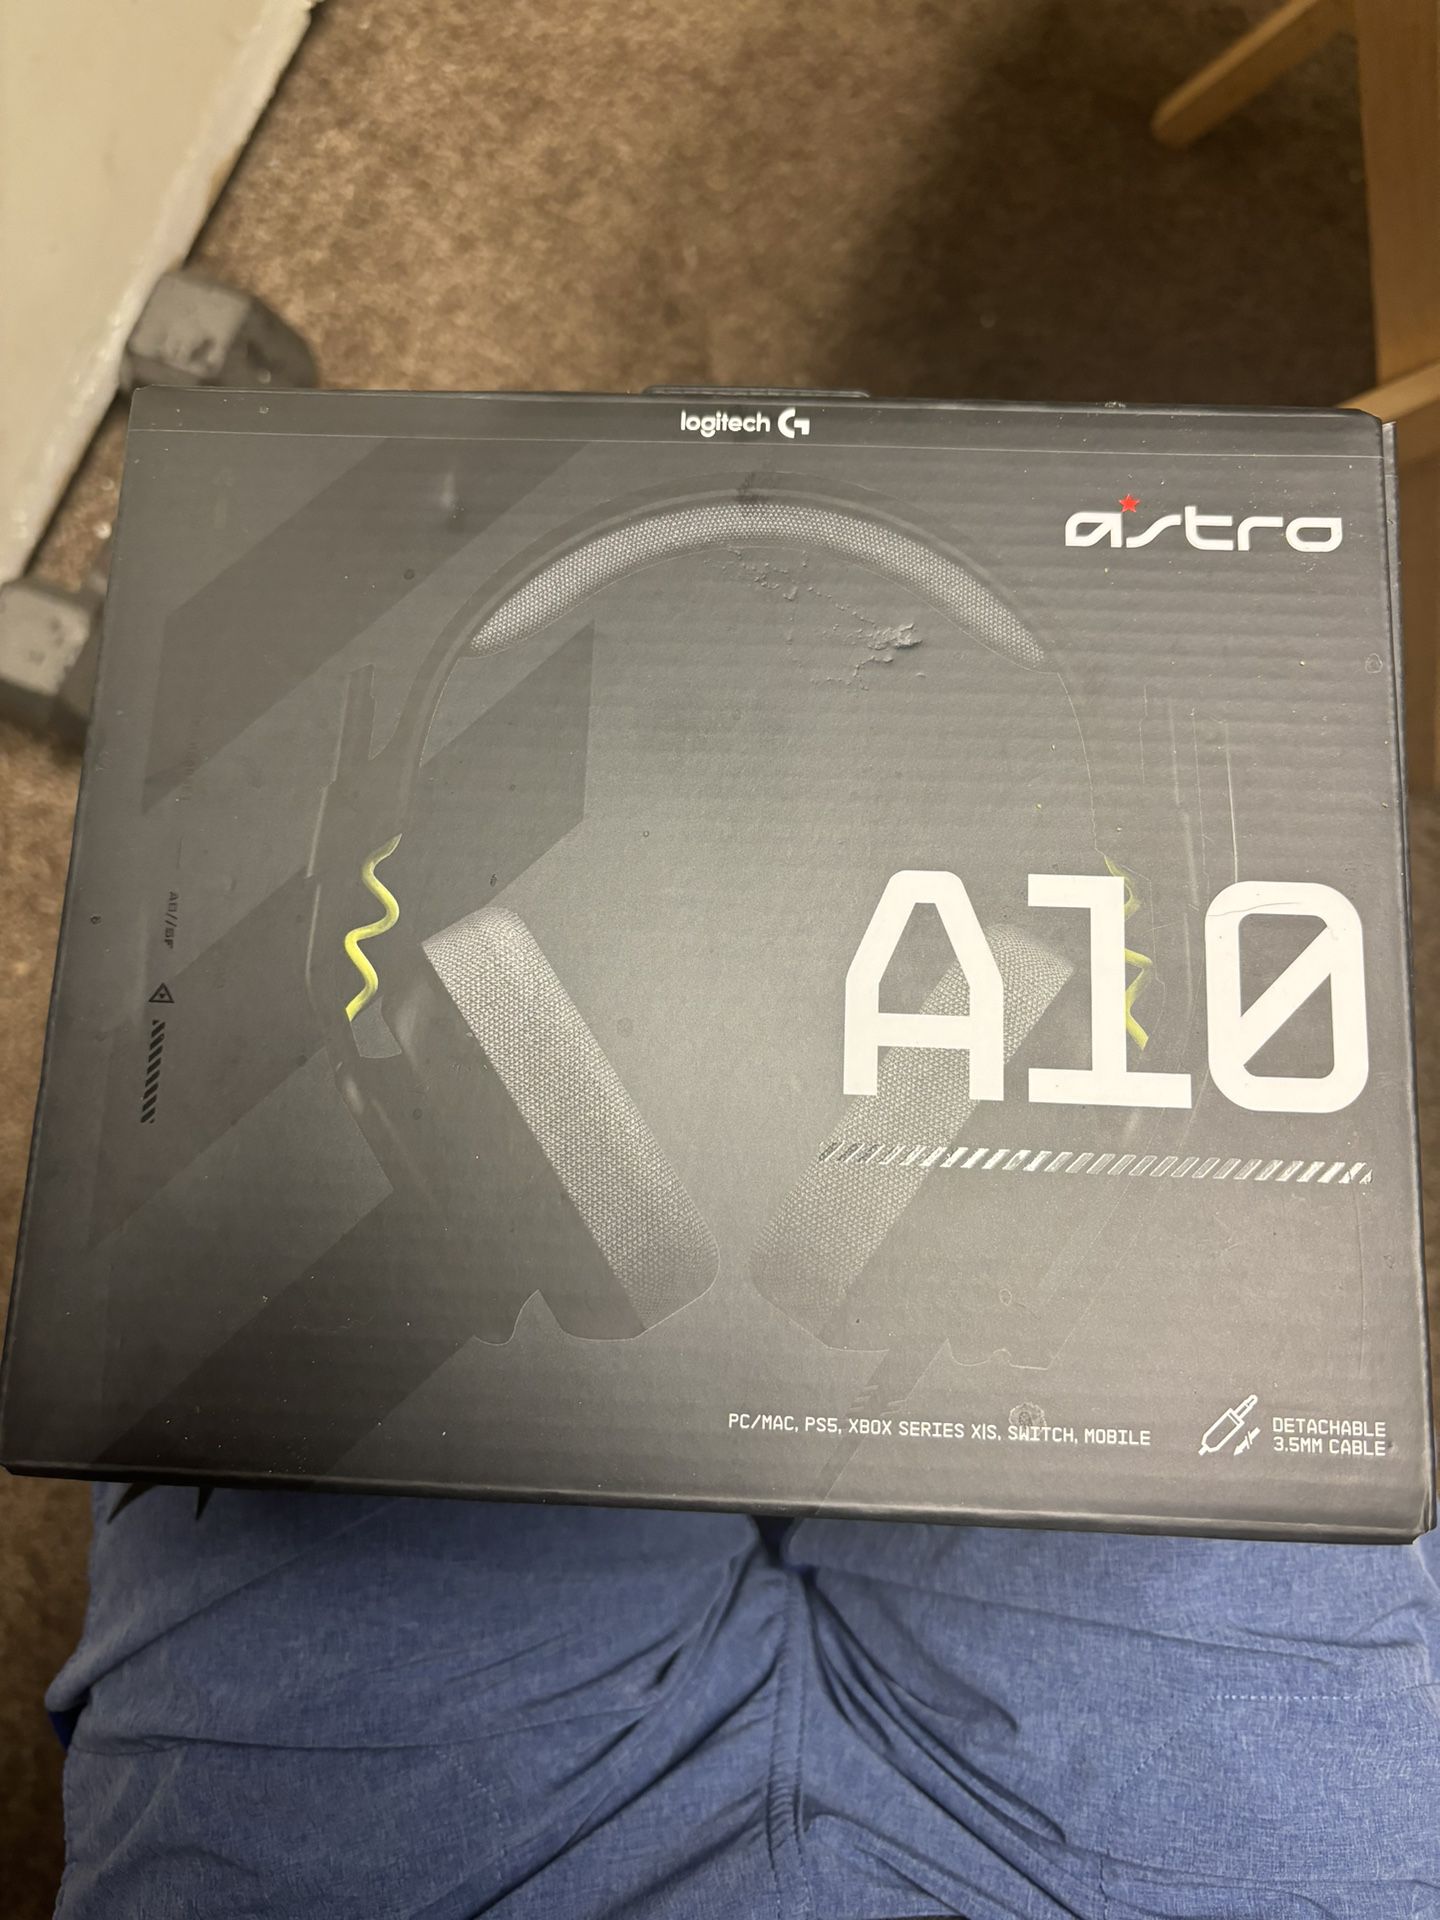 Astro A10 Gaming Headset